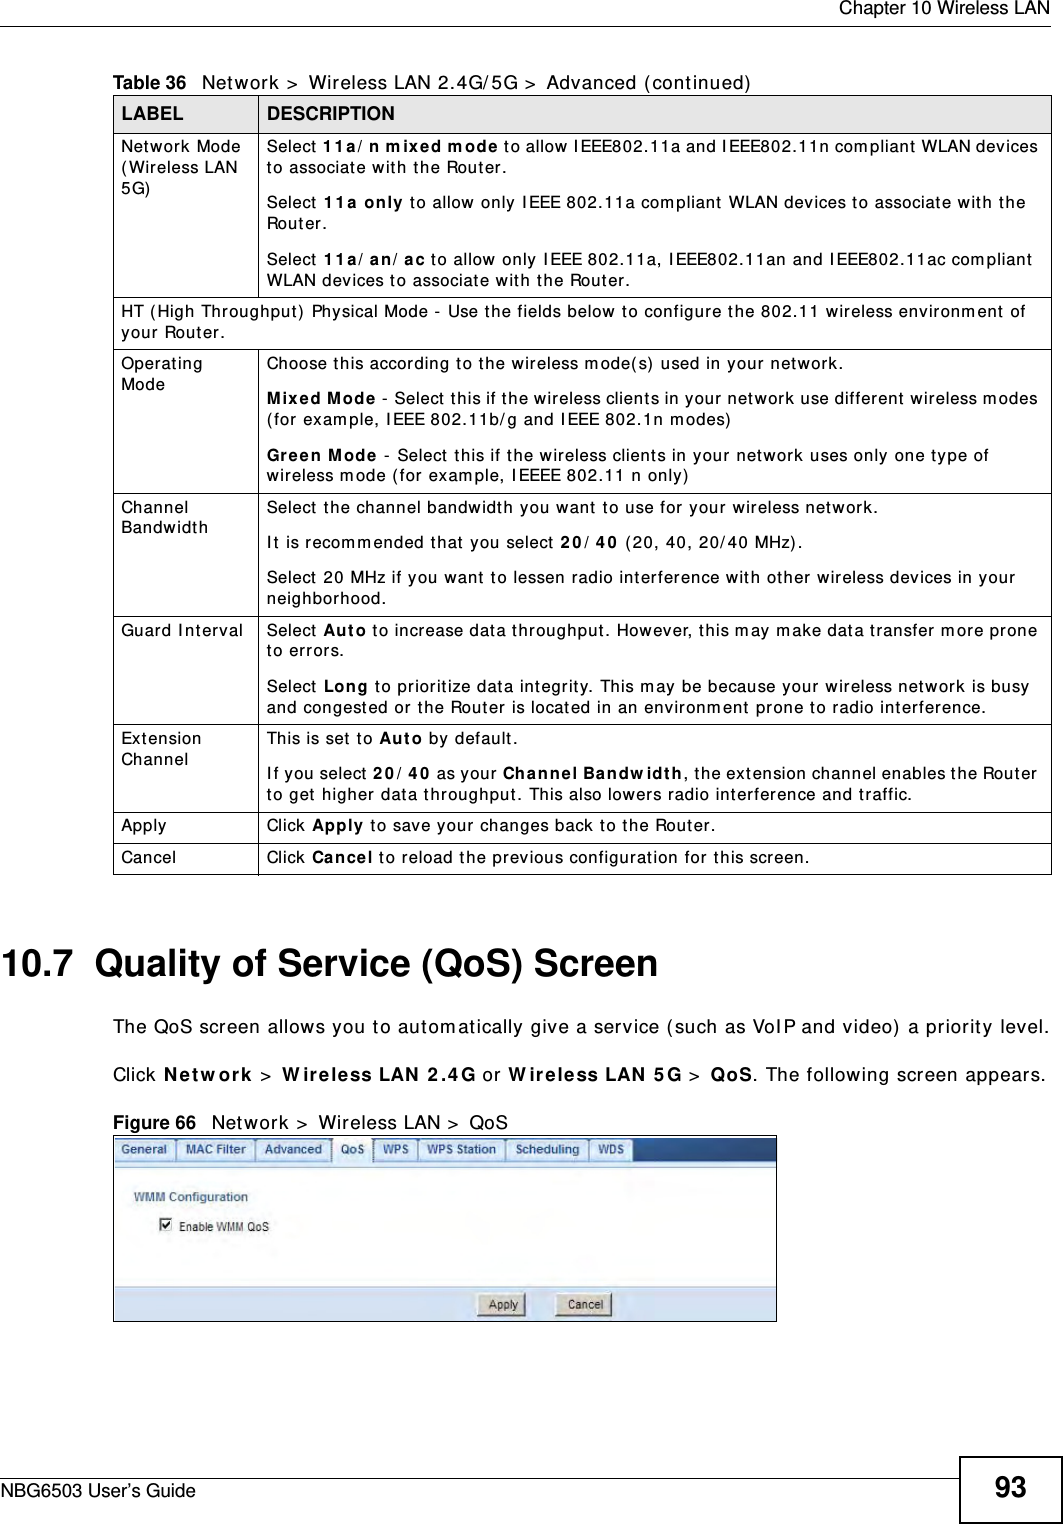  Chapter 10 Wireless LANNBG6503 User’s Guide 9310.7  Quality of Service (QoS) ScreenThe QoS screen allows you to automatically give a service (such as VoIP and video) a priority level.Click Network &gt; Wireless LAN 2.4G or Wireless LAN 5G &gt; QoS. The following screen appears.Figure 66   Network &gt; Wireless LAN &gt; QoS Network Mode (Wireless LAN 5G)Select 11a/n mixed mode to allow IEEE802.11a and IEEE802.11n compliant WLAN devices to associate with the Router.Select 11a only to allow only IEEE 802.11a compliant WLAN devices to associate with the Router.Select 11a/an/ac to allow only IEEE 802.11a, IEEE802.11an and IEEE802.11ac compliant WLAN devices to associate with the Router.HT (High Throughput) Physical Mode - Use the fields below to configure the 802.11 wireless environment of your Router. Operating Mode Choose this according to the wireless mode(s) used in your network.Mixed Mode - Select this if the wireless clients in your network use different wireless modes (for example, IEEE 802.11b/g and IEEE 802.1n modes)Green Mode - Select this if the wireless clients in your network uses only one type of wireless mode (for example, IEEEE 802.11 n only)Channel Bandwidth Select the channel bandwidth you want to use for your wireless network.It is recommended that you select 20/40 (20, 40, 20/40 MHz). Select 20 MHz if you want to lessen radio interference with other wireless devices in your neighborhood.Guard Interval Select Auto to increase data throughput. However, this may make data transfer more prone to errors.Select Long to prioritize data integrity. This may be because your wireless network is busy and congested or the Router is located in an environment prone to radio interference.Extension Channel This is set to Auto by default. If you select 20/40 as your Channel Bandwidth, the extension channel enables the Router to get higher data throughput. This also lowers radio interference and traffic.Apply Click Apply to save your changes back to the Router.Cancel Click Cancel to reload the previous configuration for this screen.Table 36   Network &gt; Wireless LAN 2.4G/5G &gt; Advanced (continued)LABEL DESCRIPTION